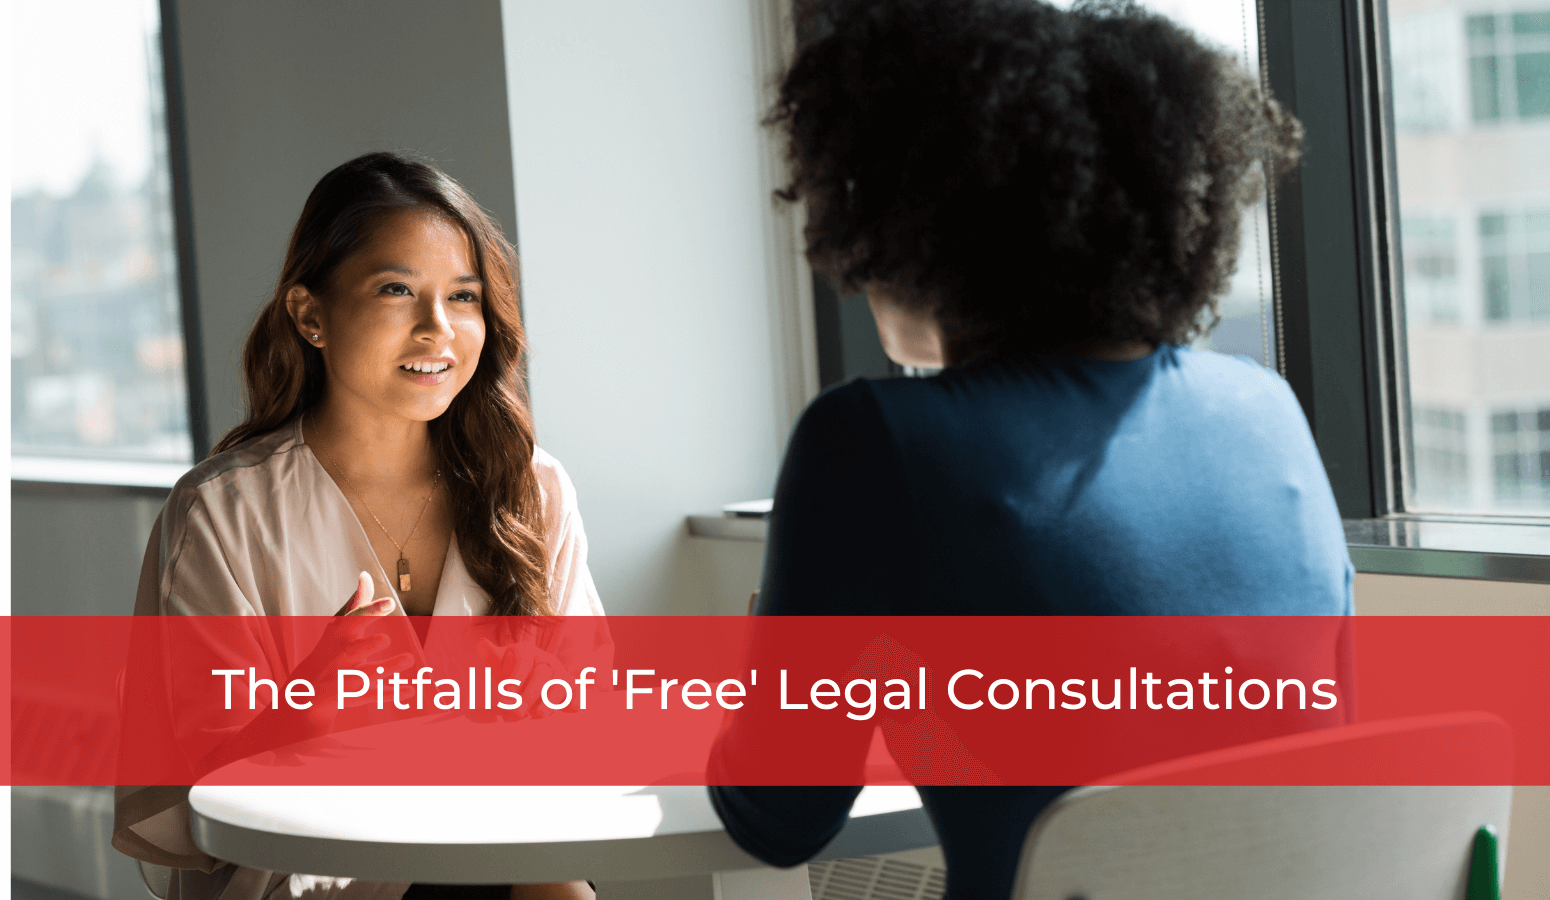 Featured image for “The Pitfalls of ‘Free’ Legal Consultations”